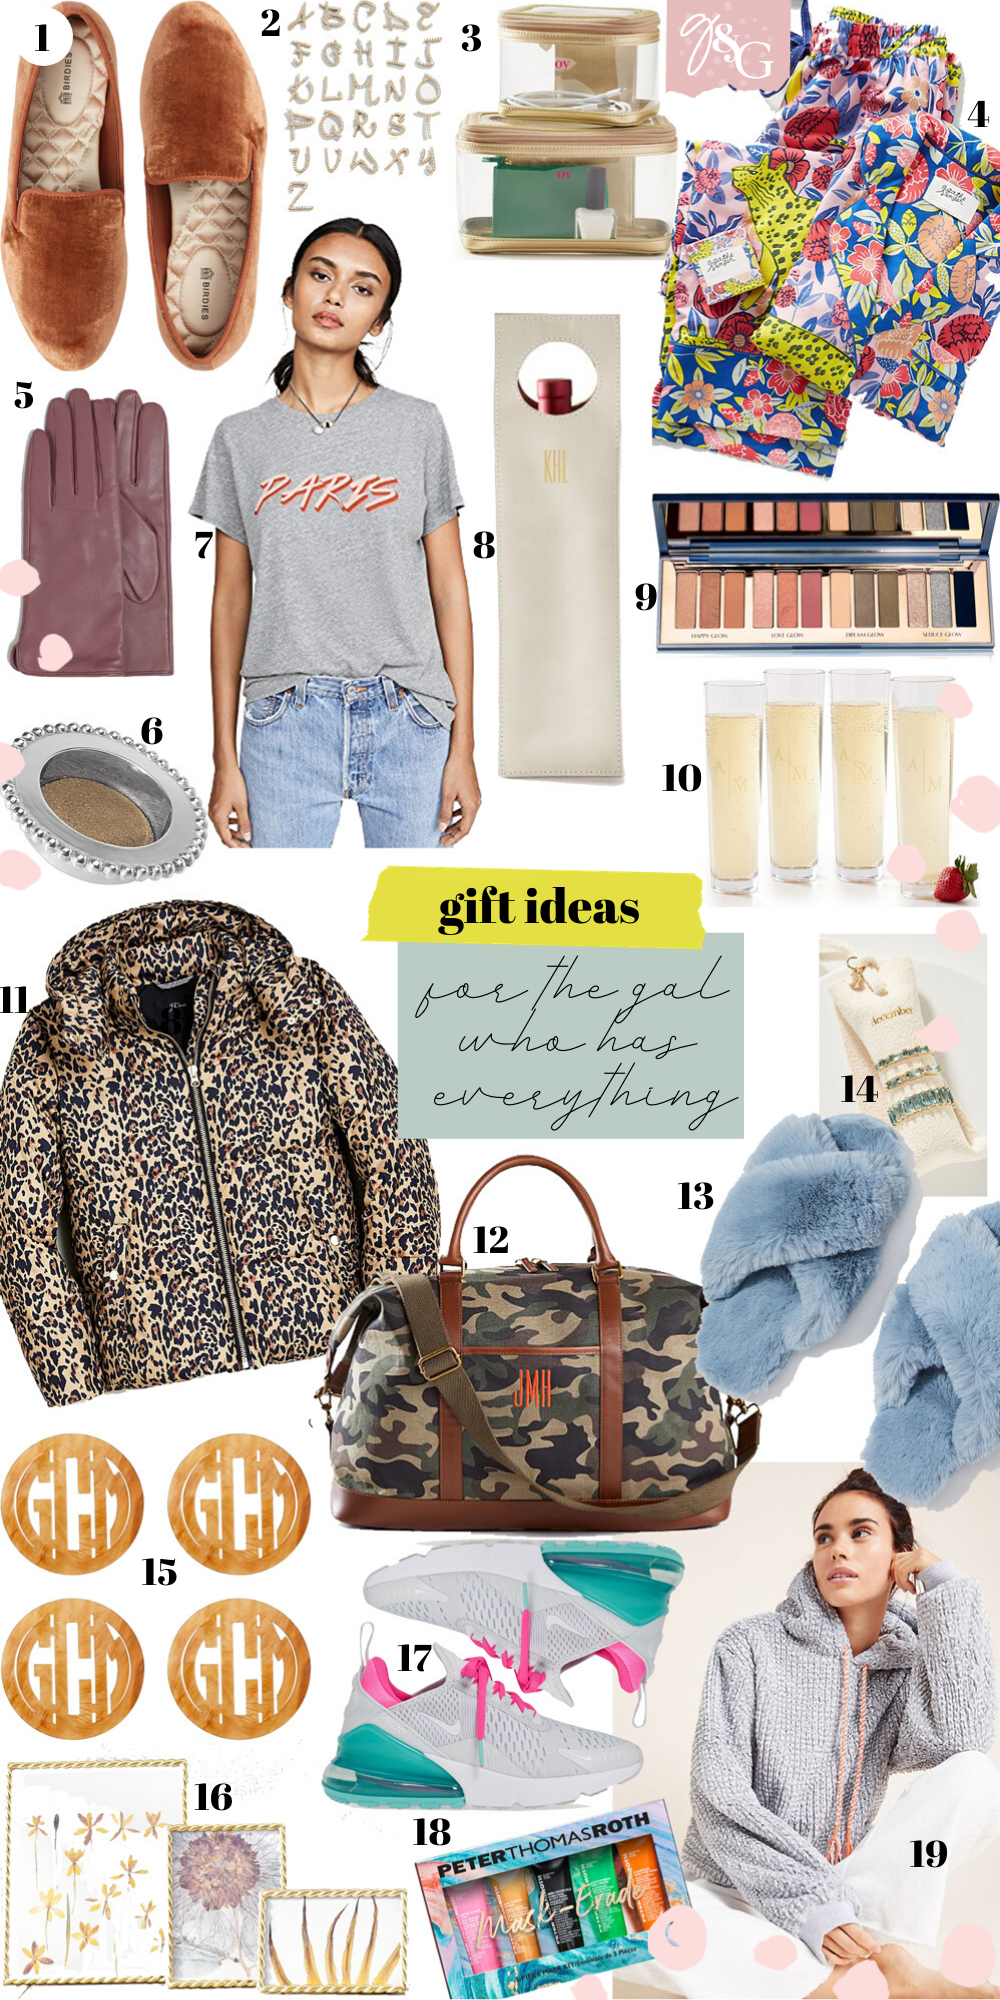 Gift Guide: gift ideas for the girl who has everything - Glitter & Gingham